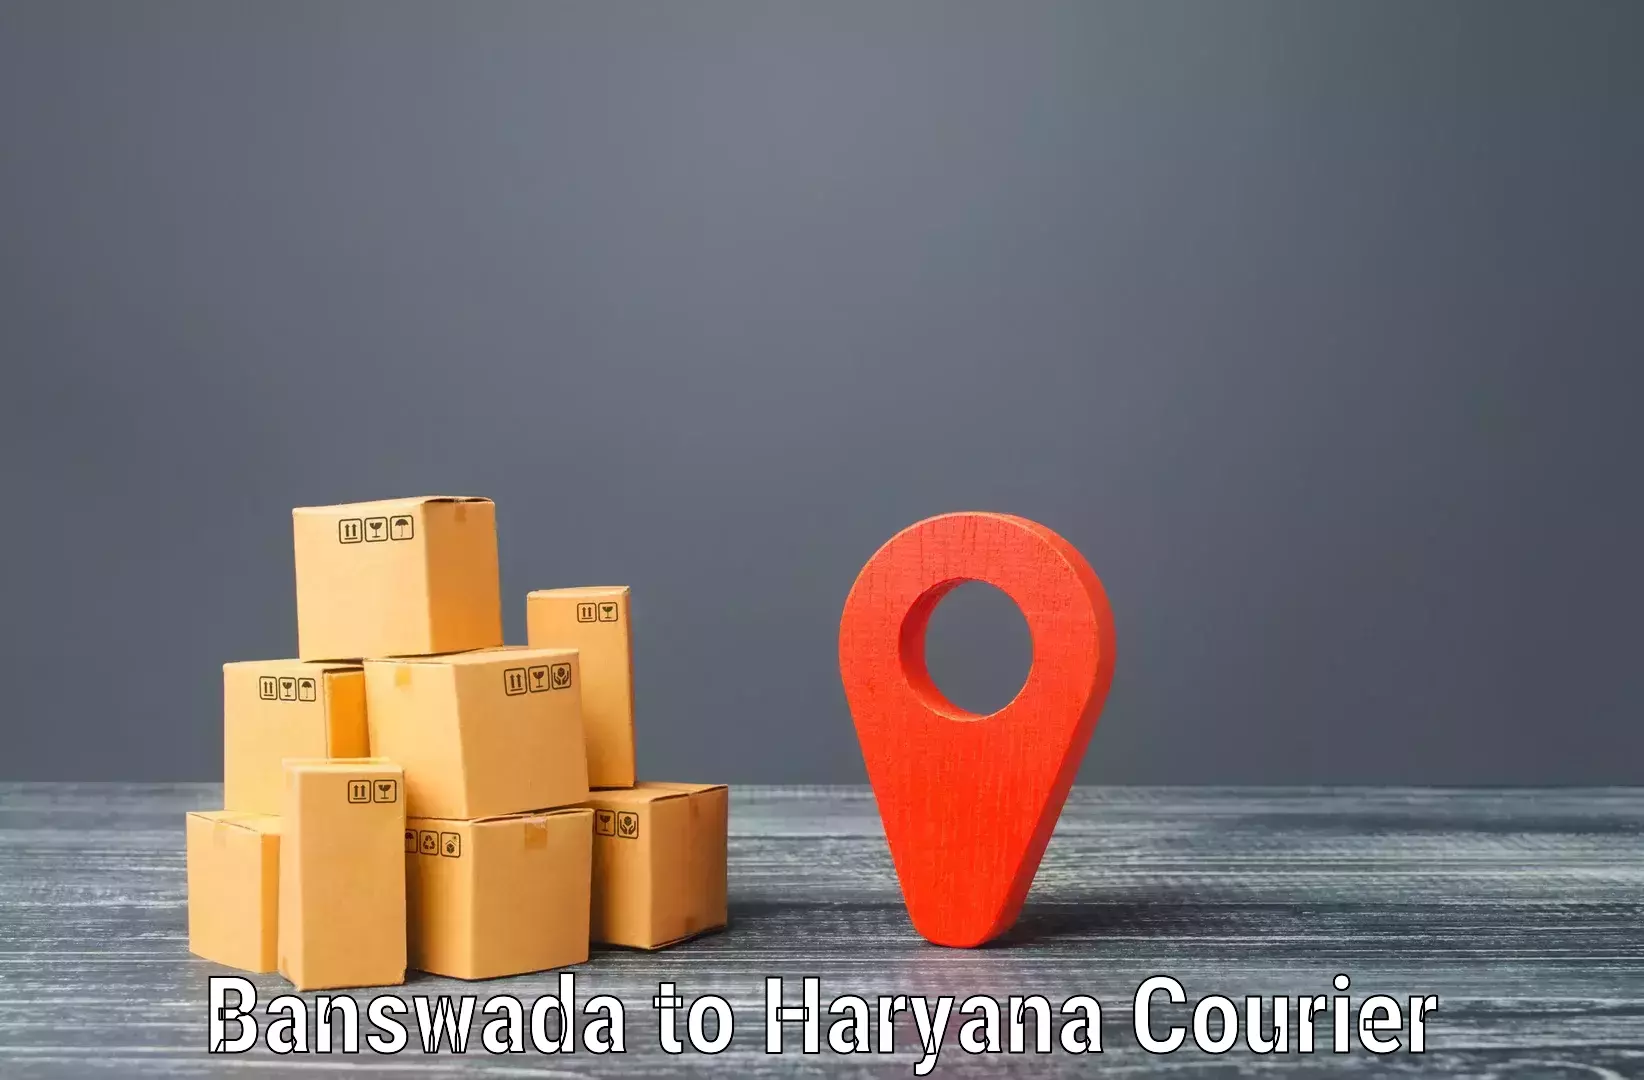 Local delivery service in Banswada to Gurgaon